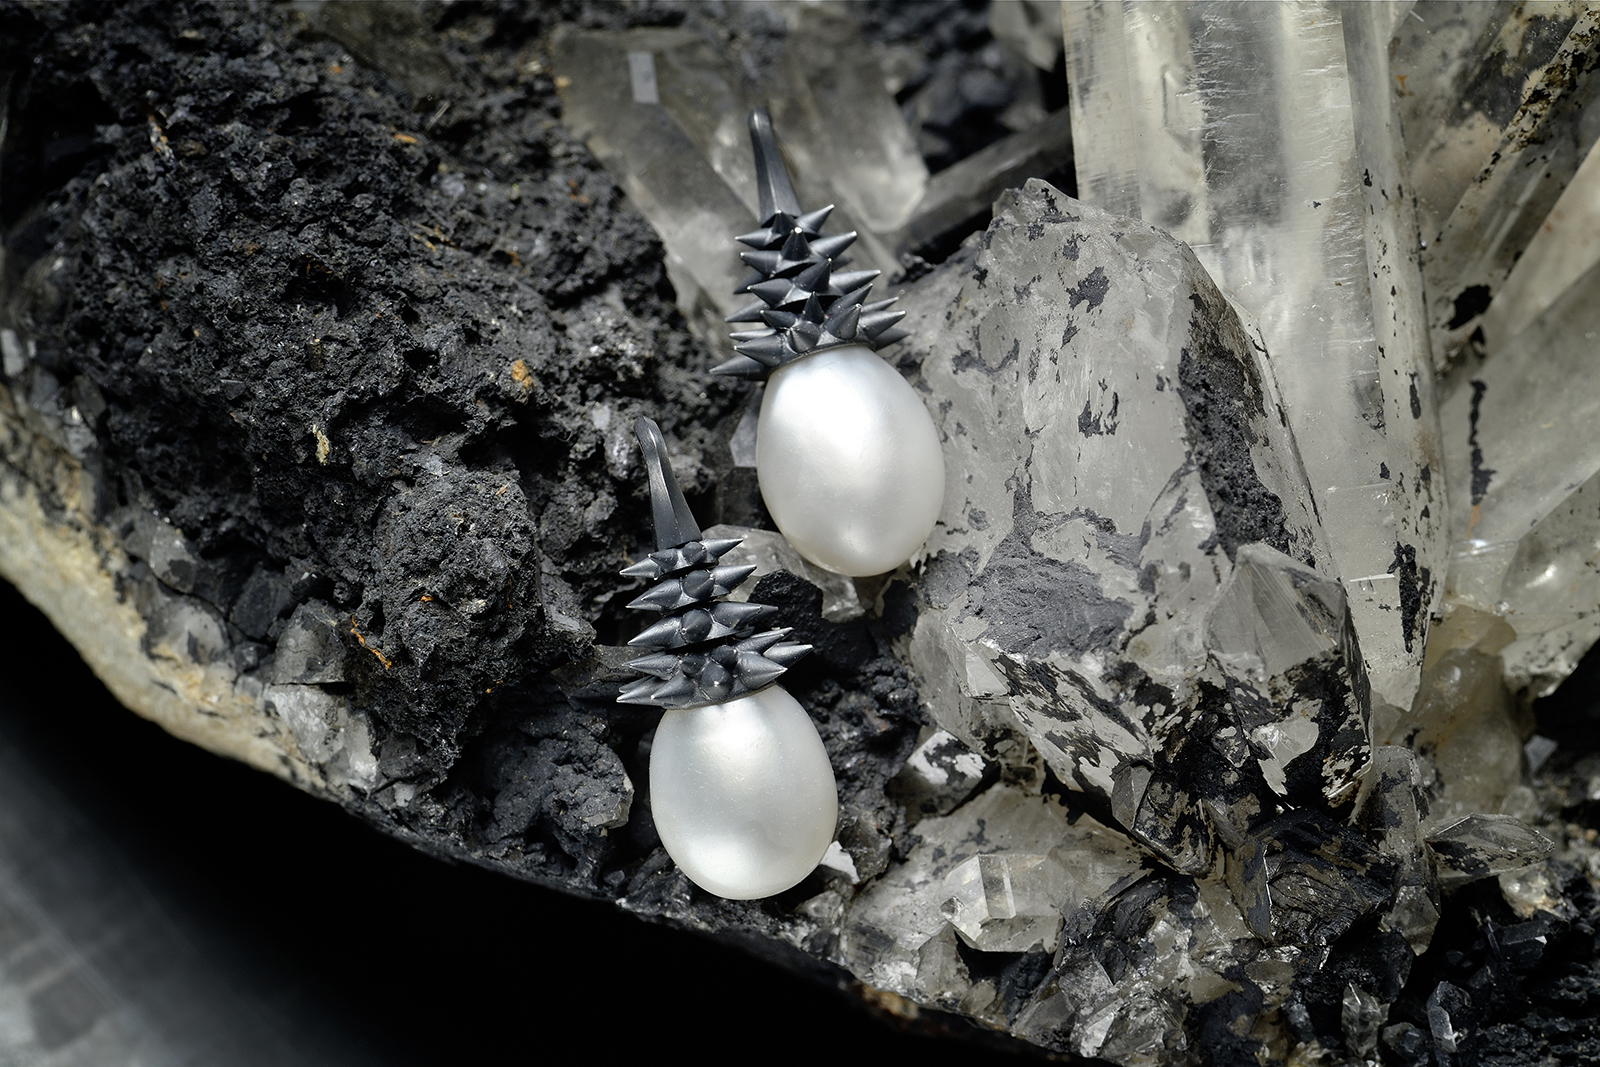 Hemmerle earrings with pearls, white gold, silver. Images courtesy of Hemmerle